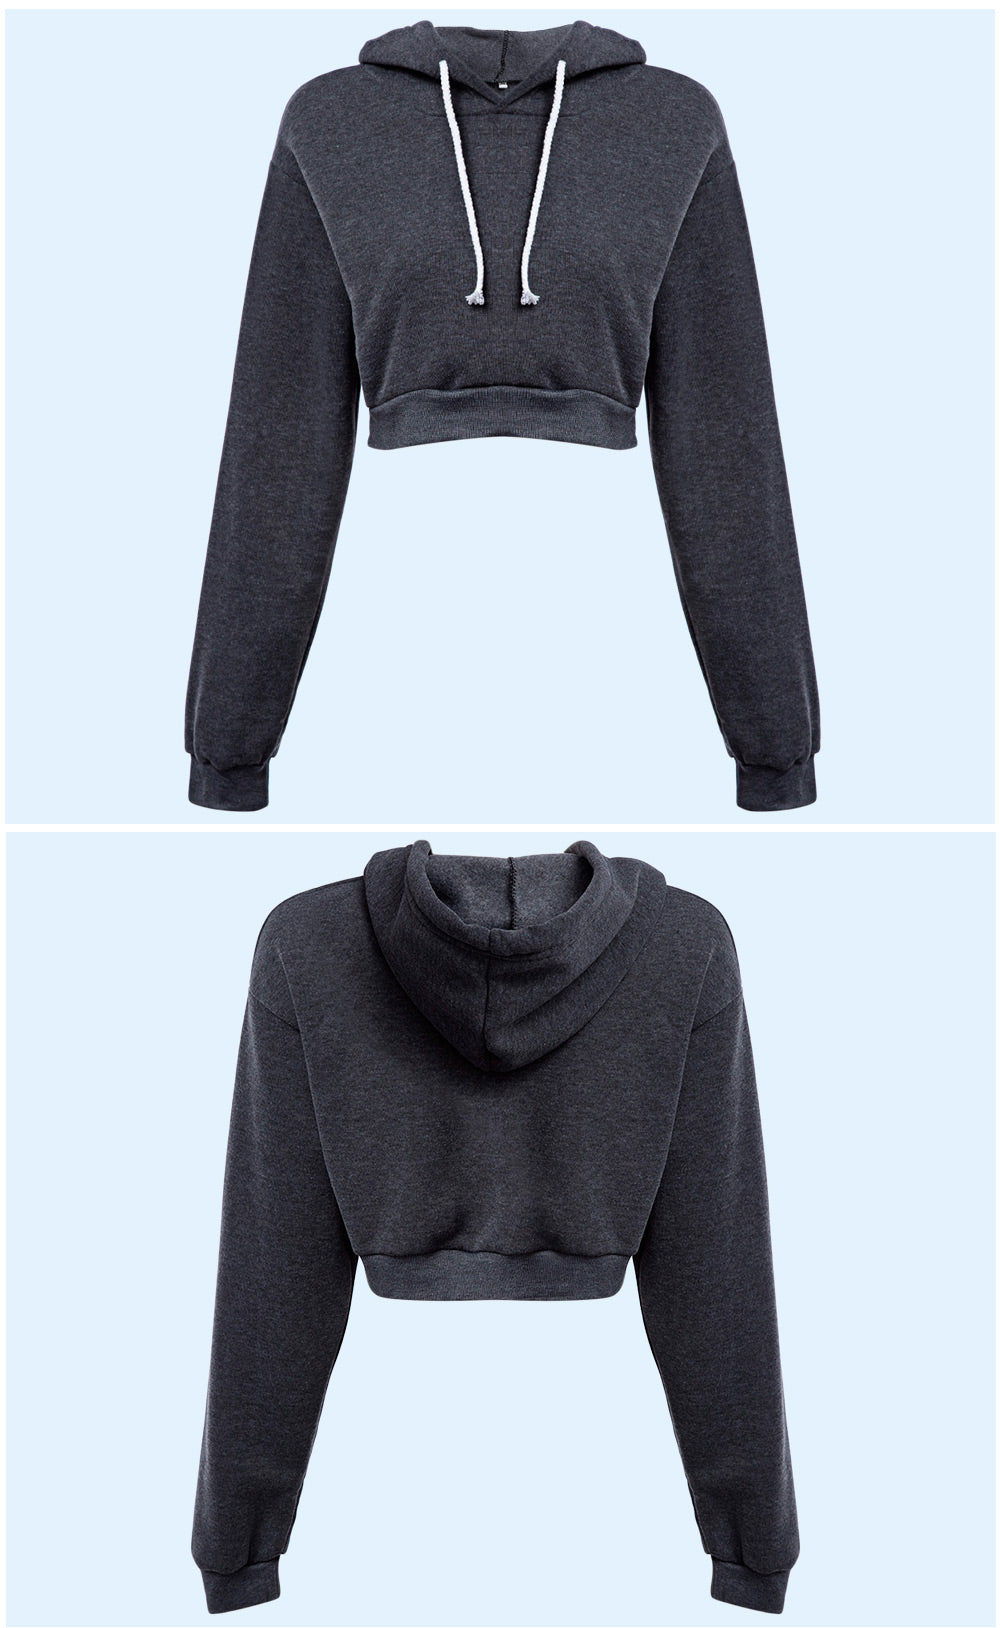 Casual Hooded Pure Color Hoodie for Women 2543